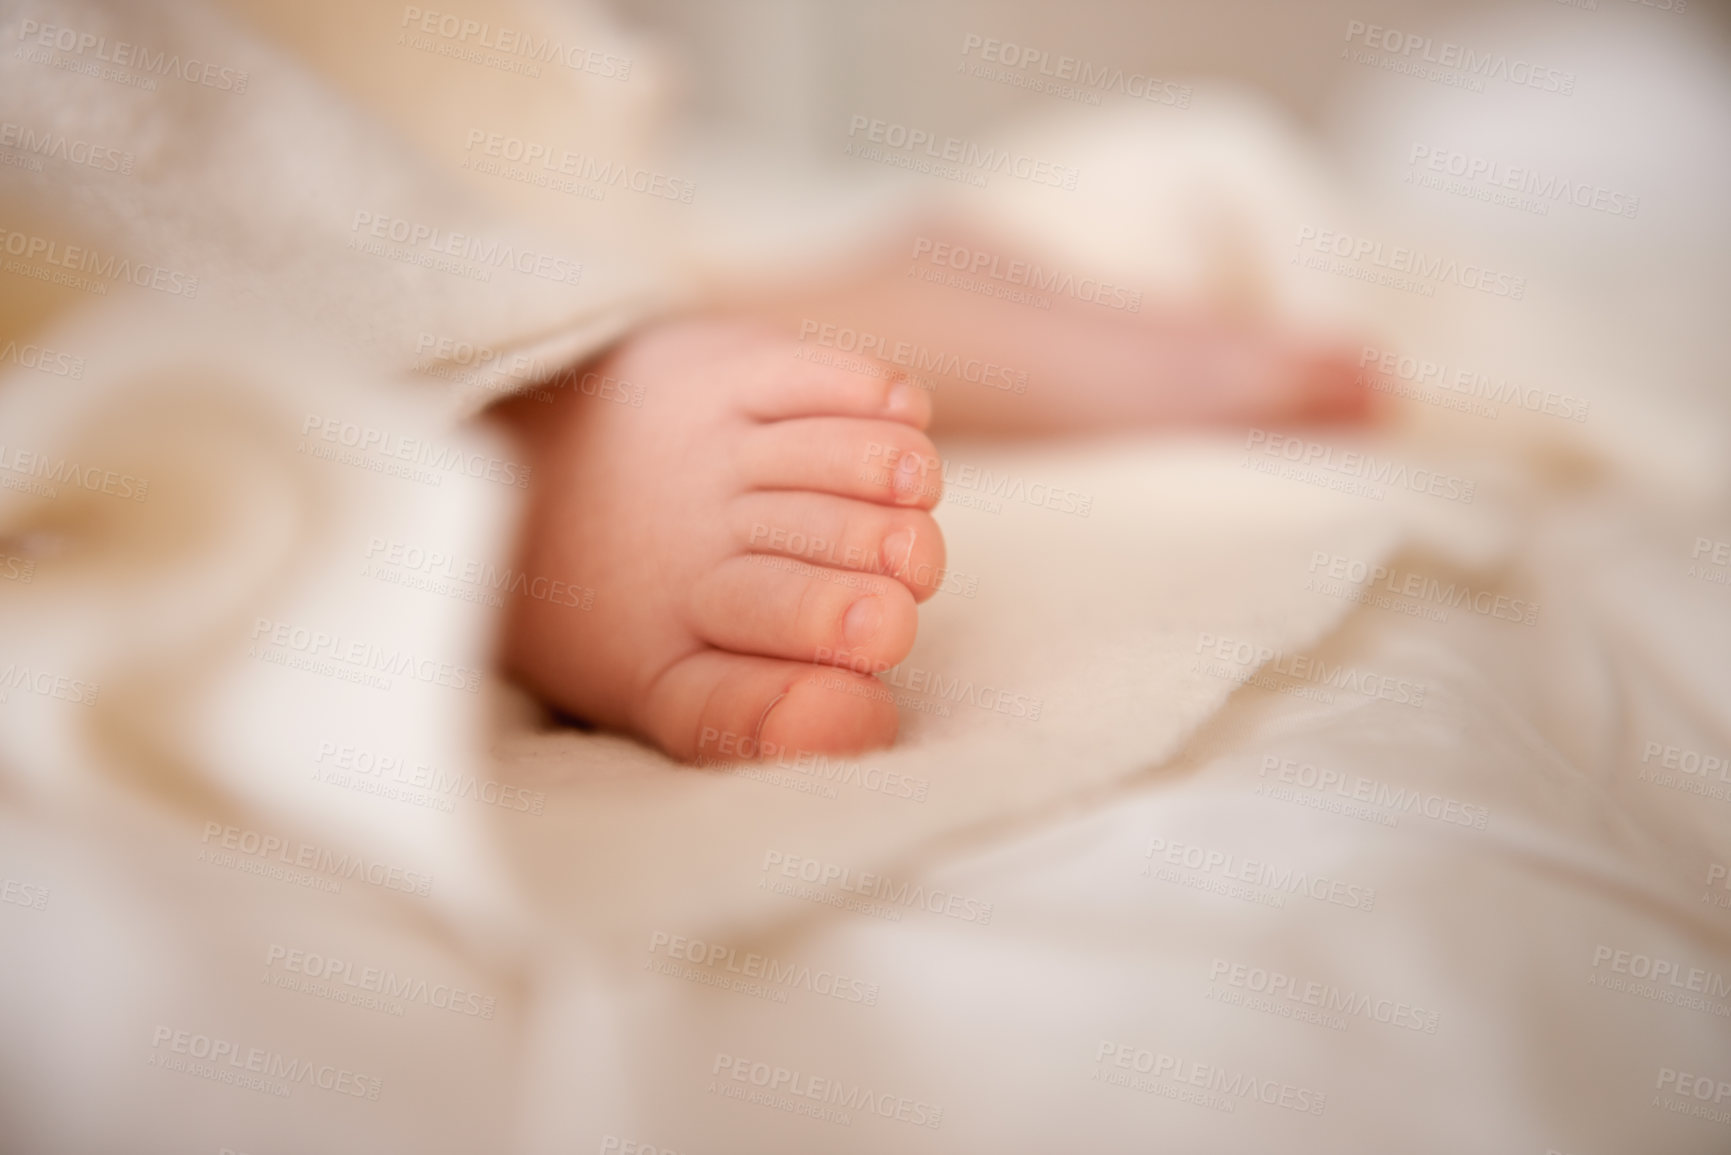 Buy stock photo Baby, feet and toes or blanket as closeup for childhood development or nursery sleeping, relax or resting. Kid, wellness and childcare on bed for wellbeing nap or dreaming nurture, caring or calm